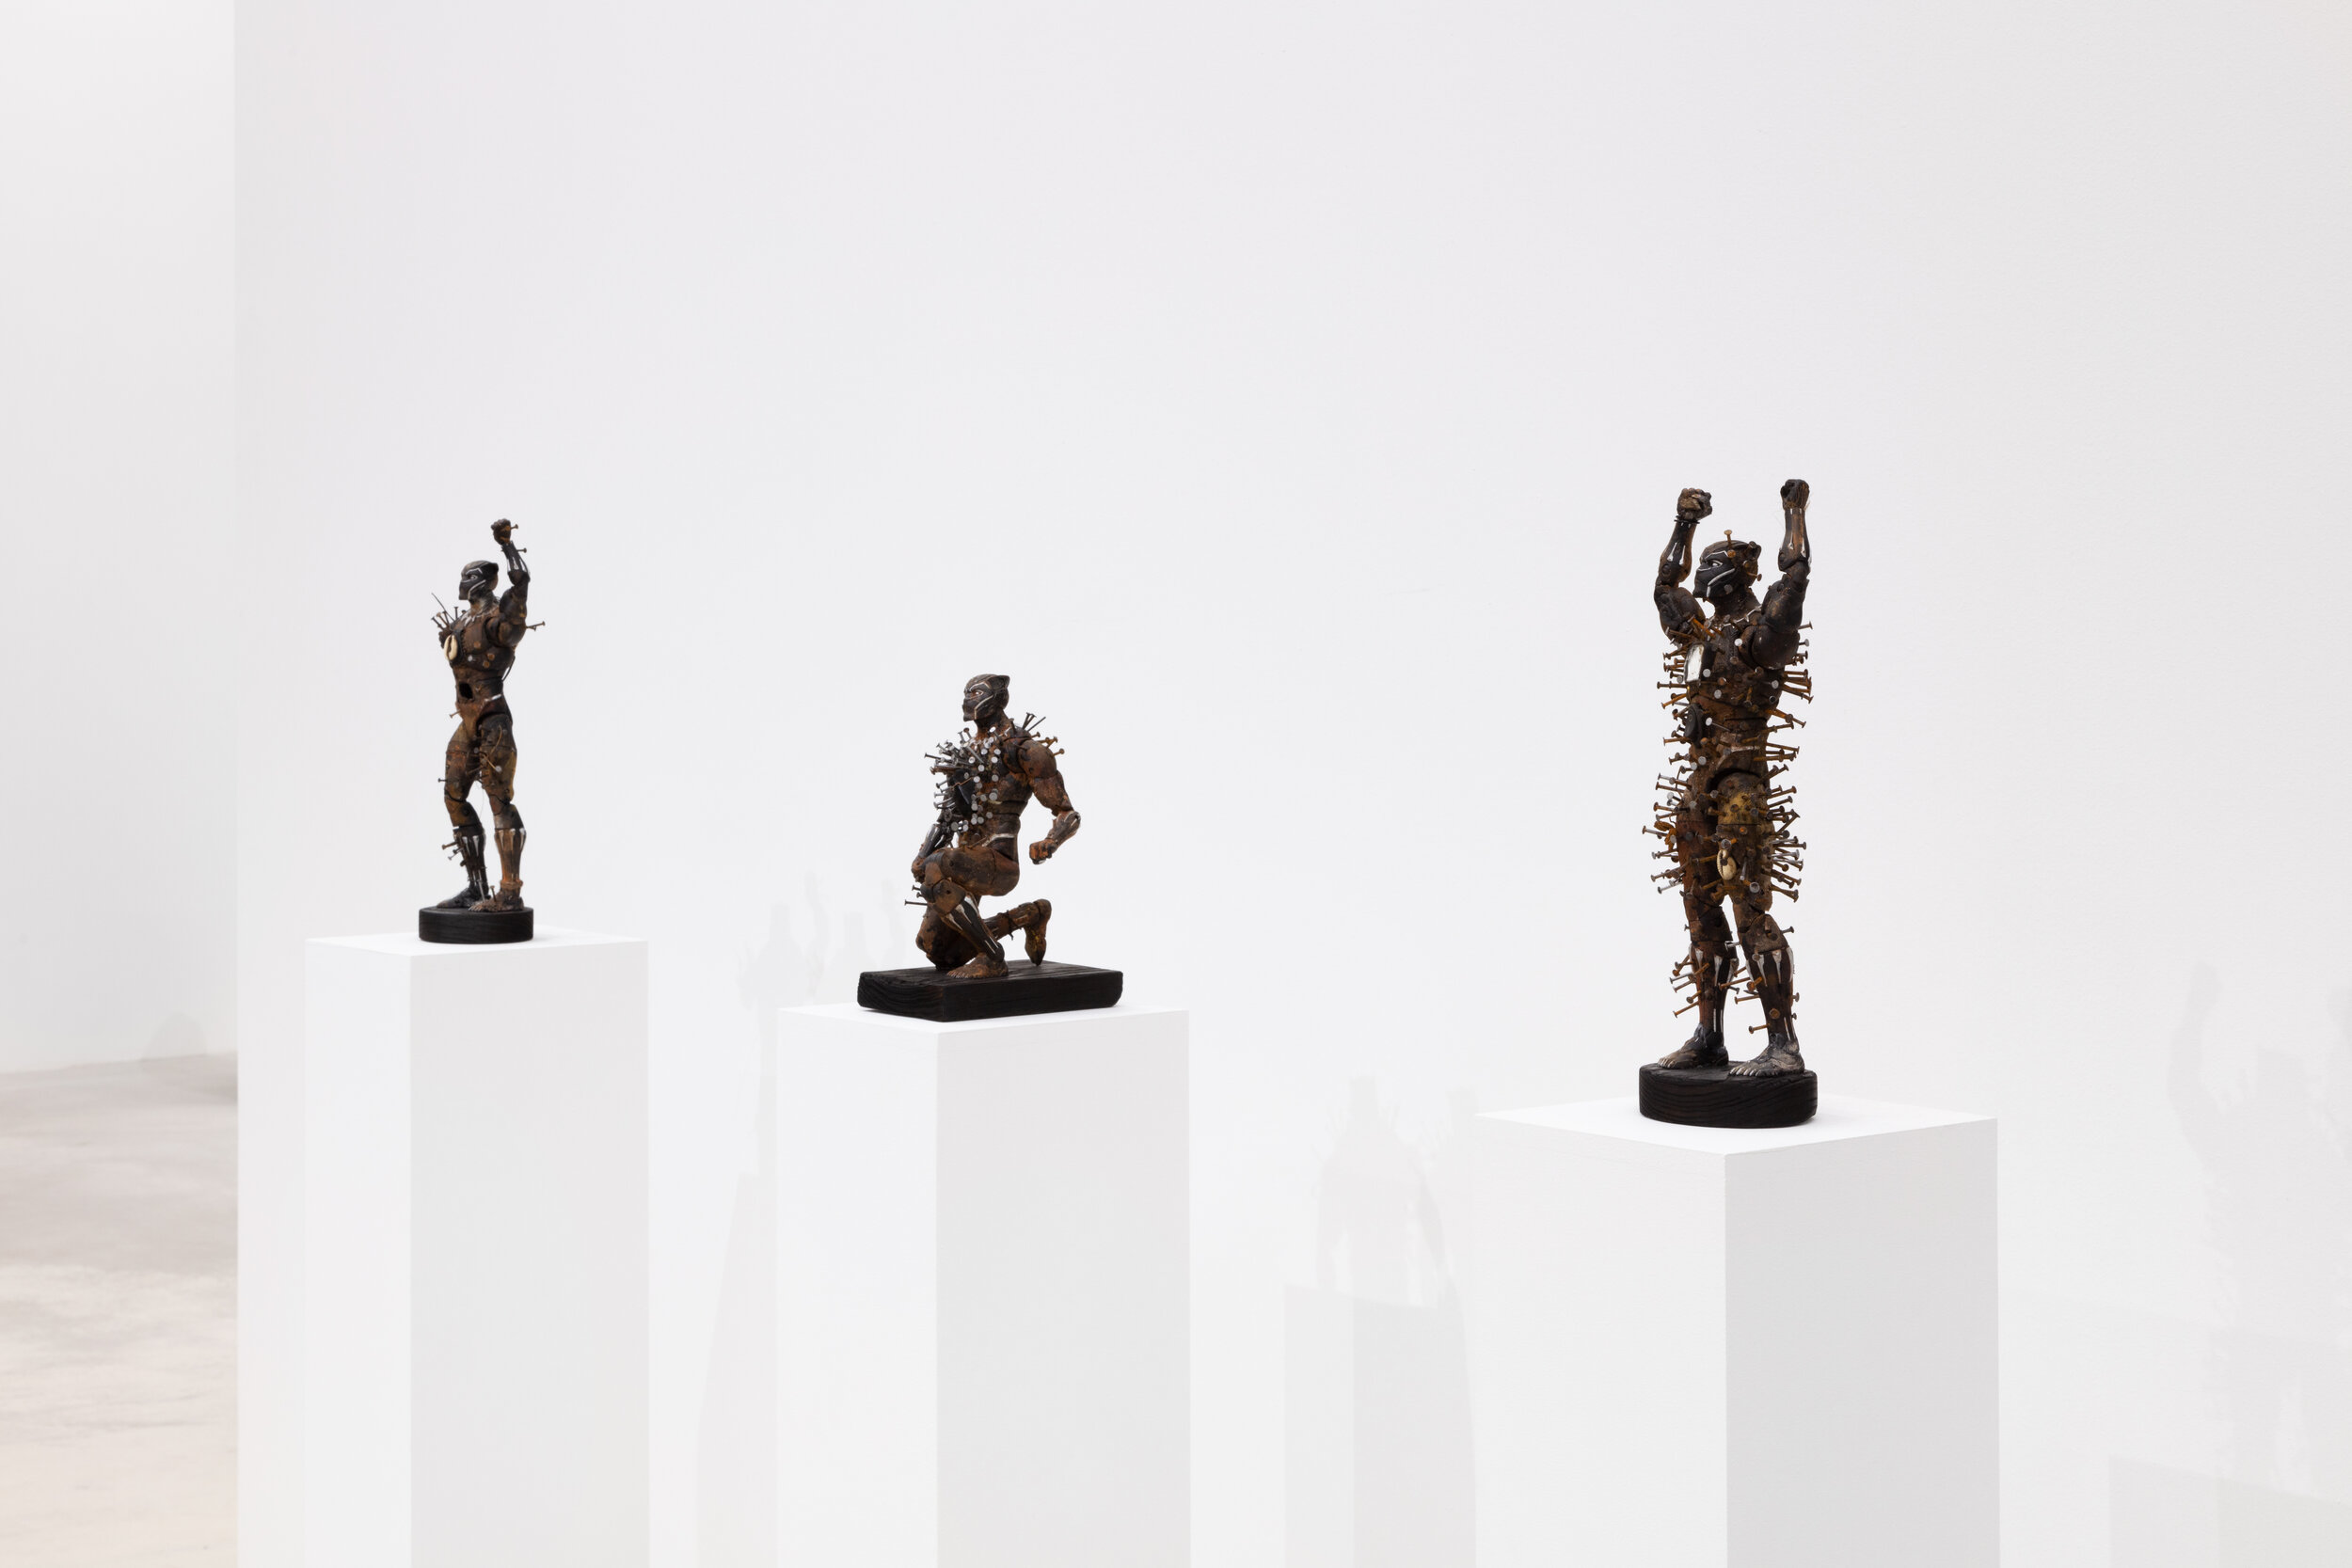  Install view - Power figure for the American Negro:  Black power fist, Taking a knee, Hands up 